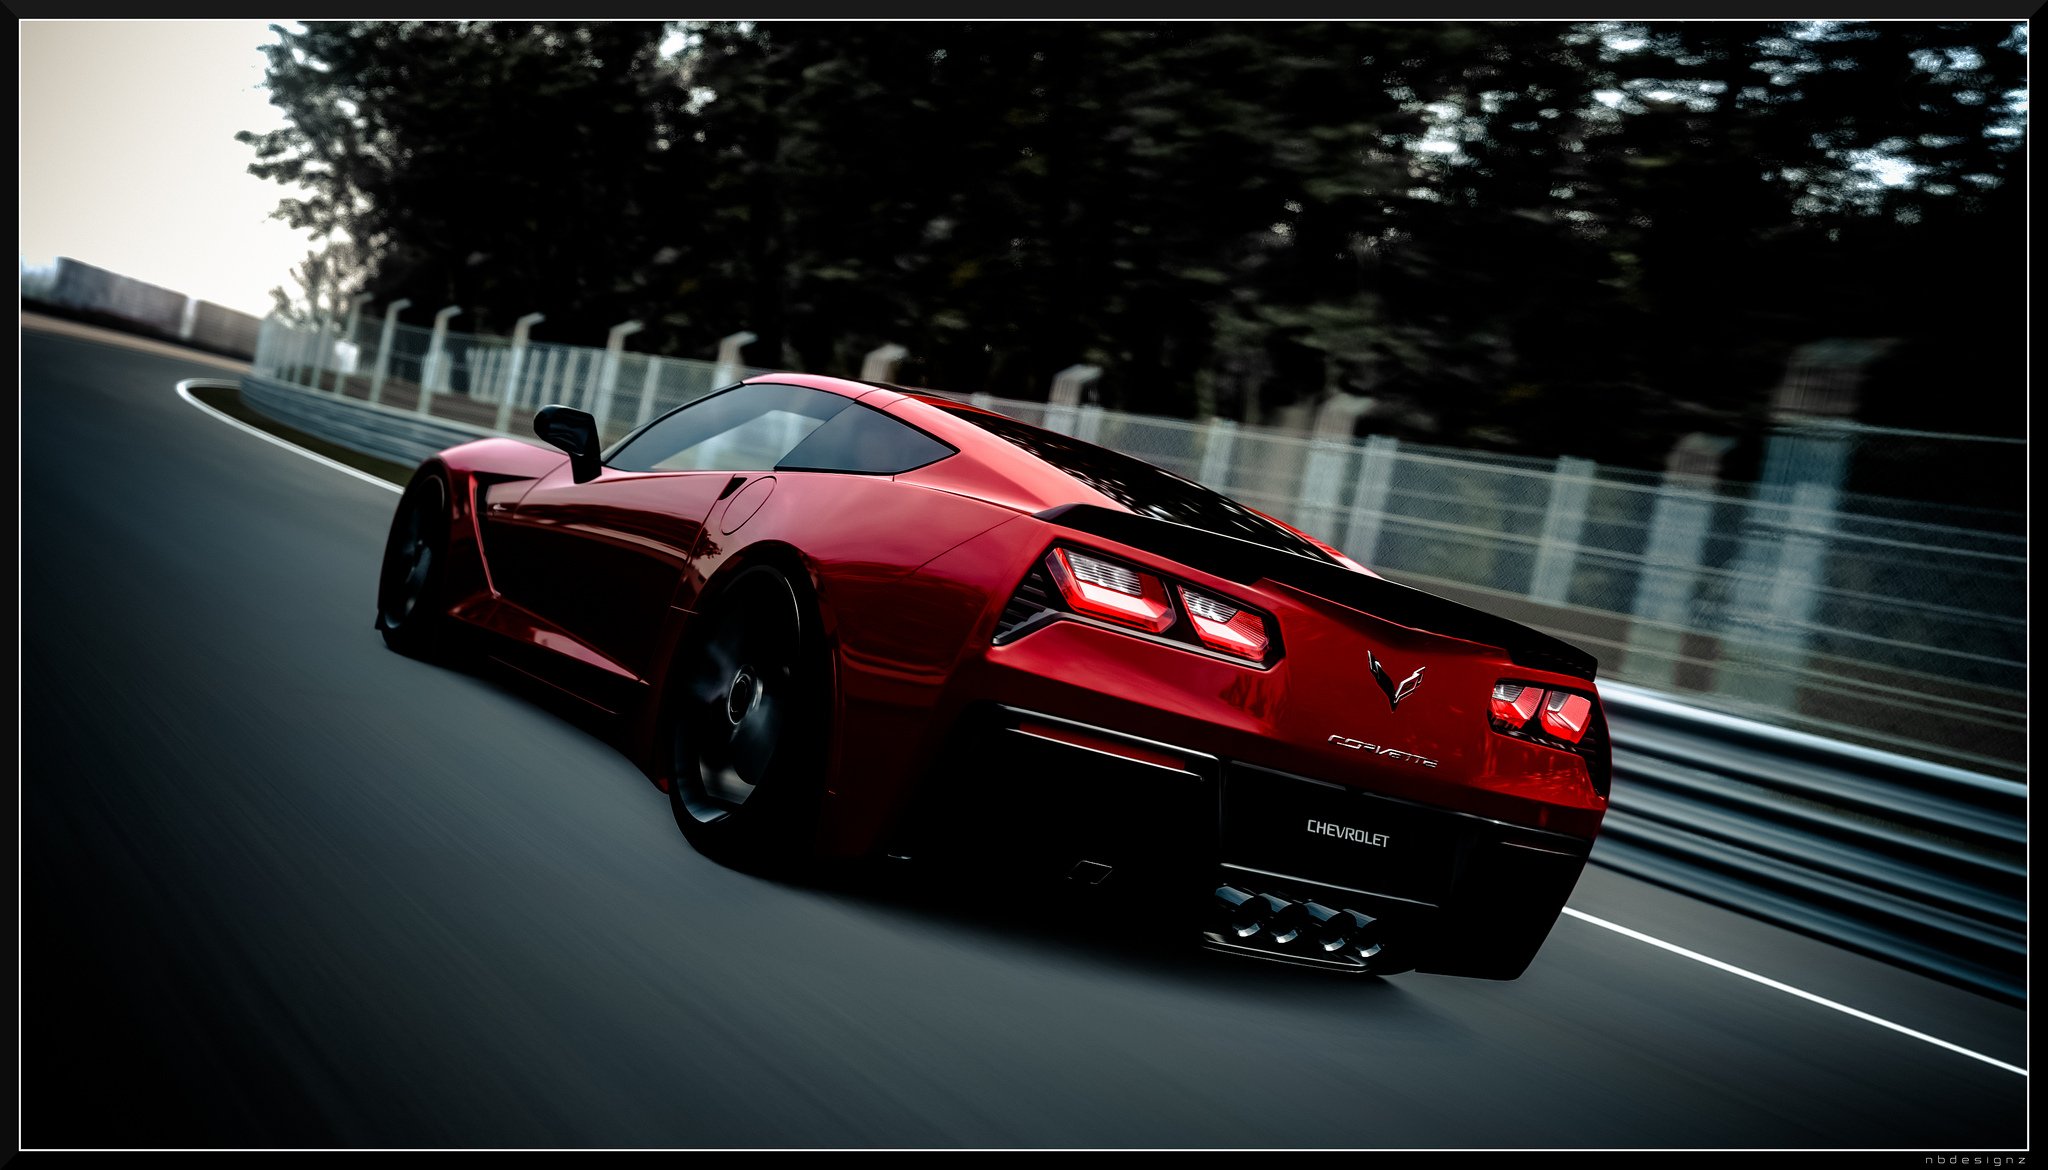 chevy, Chevrolet, Corvette, C7, Muscle, Stingray, Supercars, Convertible, Cars, Usa, Red, Rouge Wallpaper